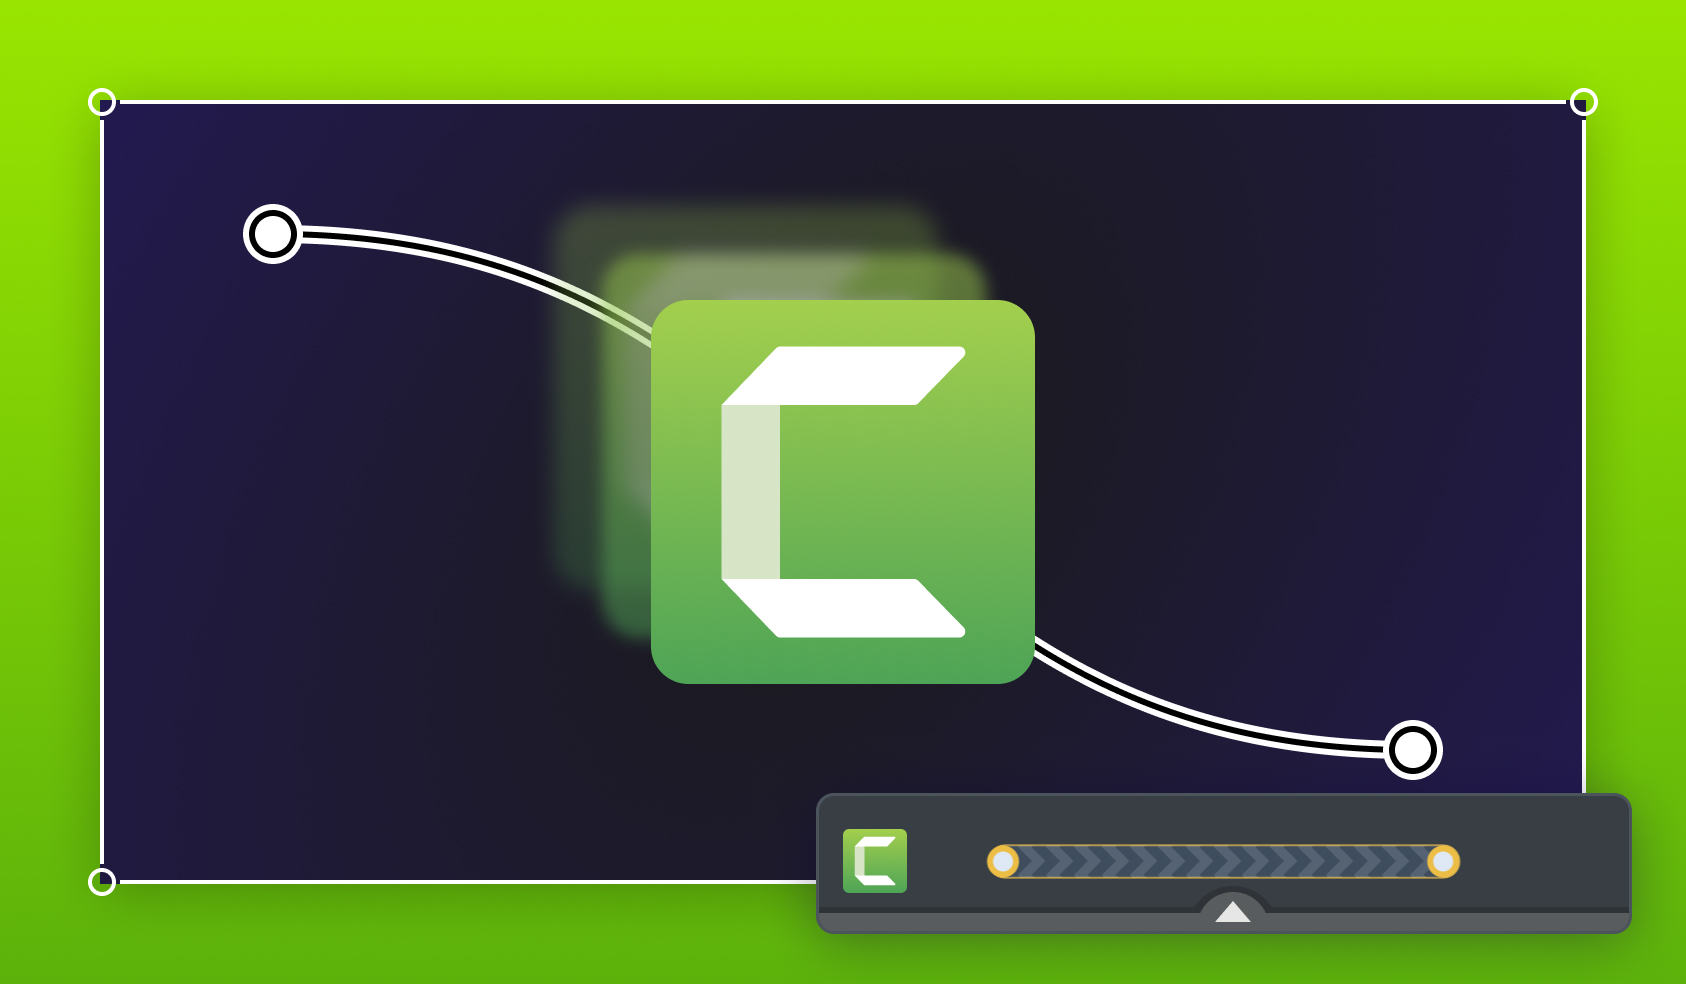 Camtasia logo with illustration of a media path being used to animate it in a video.